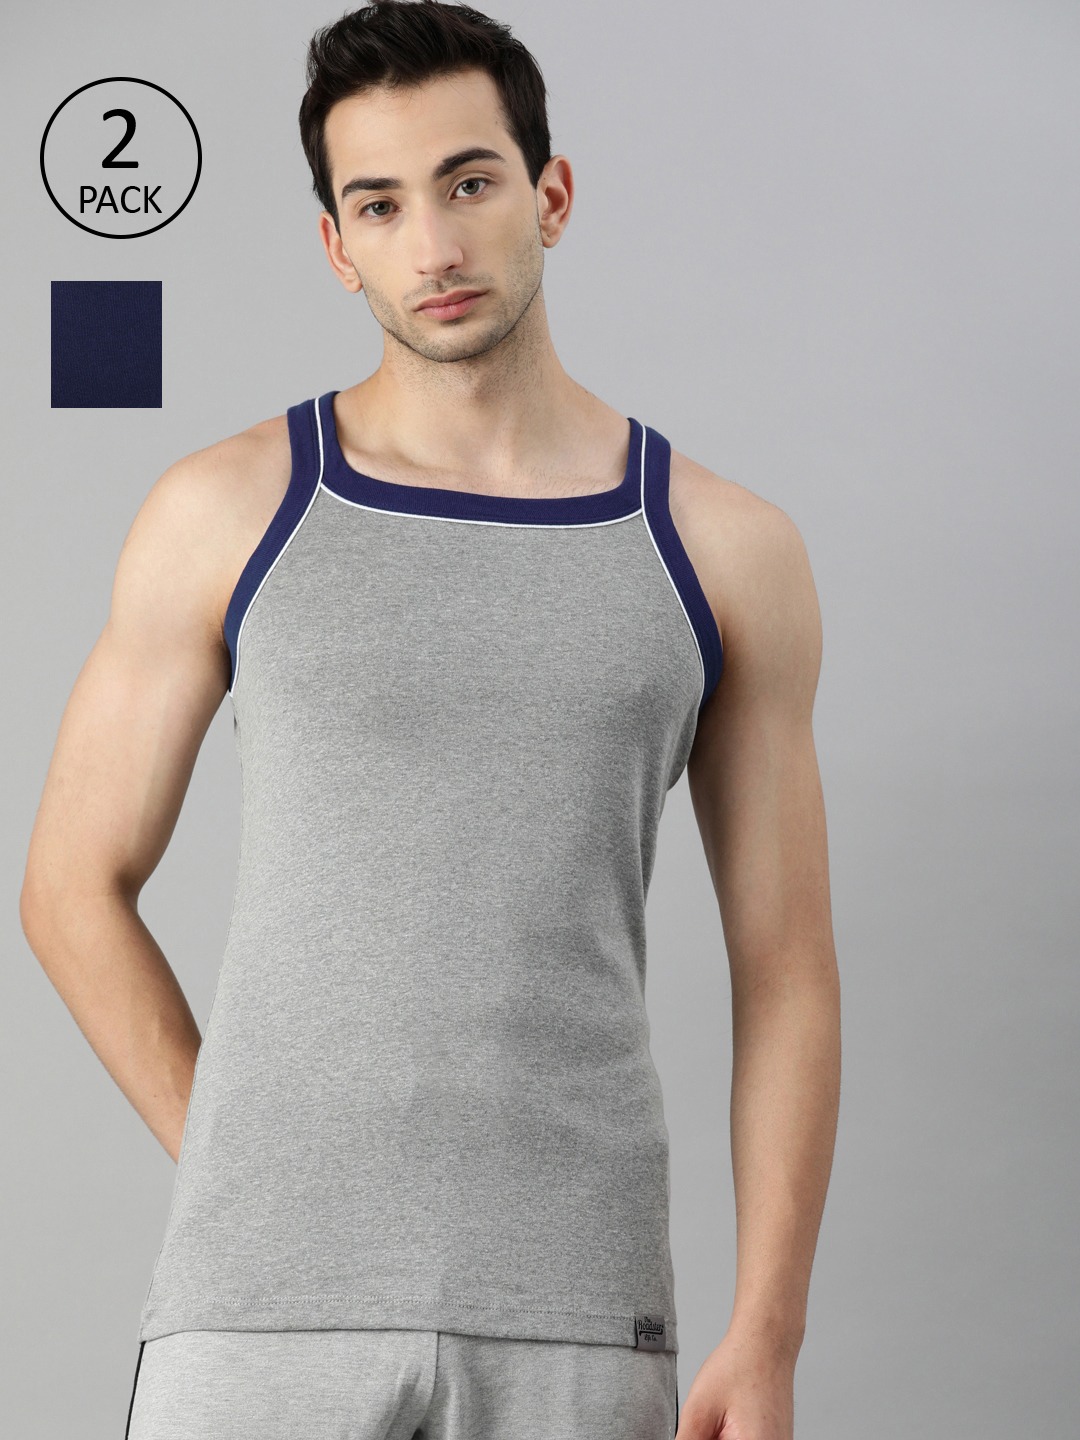 Clothing Innerwear Vests | Roadster Men Pack Of 2 Solid Cotton Innerwear Vests RDST-RB-PK2-004E-New-Blue - LF16113